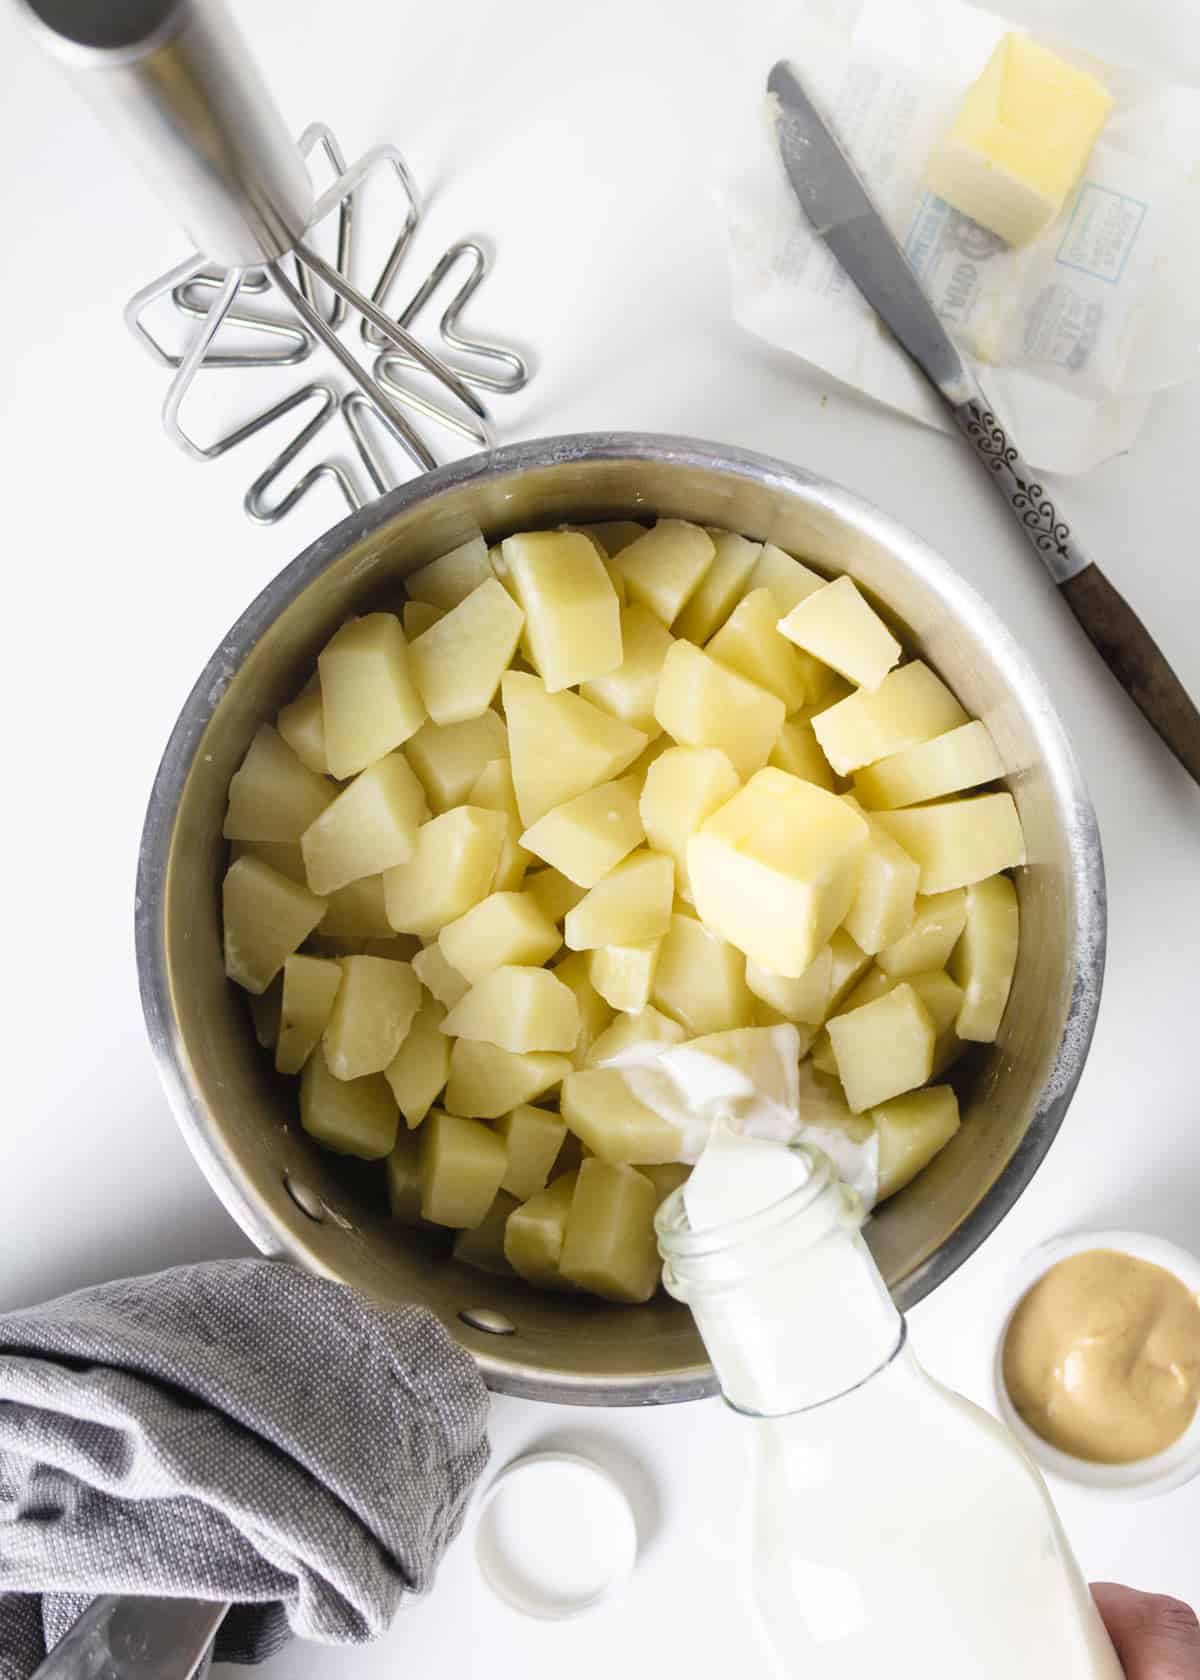 Mashing boiled potatoes with mustard, milk and butter.